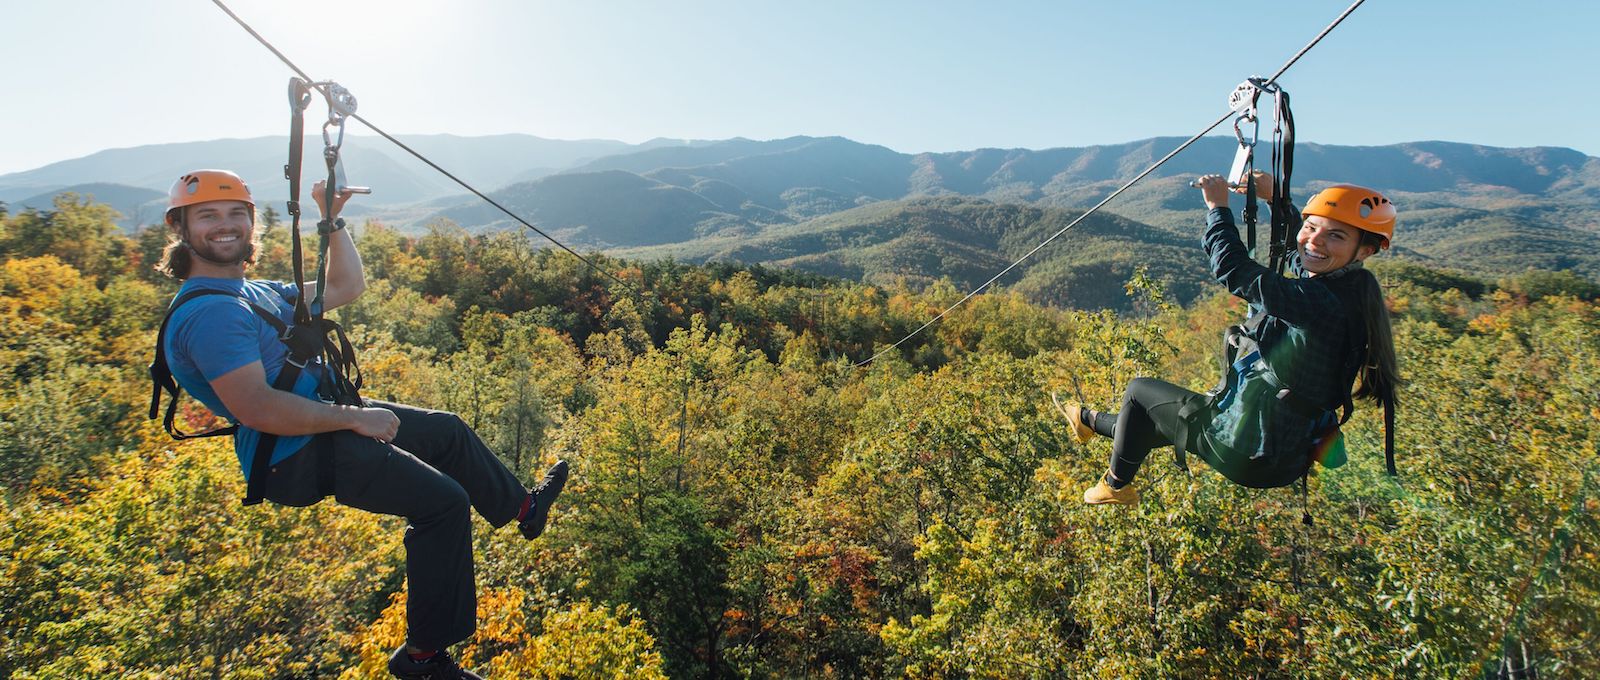 4 Ways Our Smoky Mountain Ziplines Help You Overcome a Fear of Heights